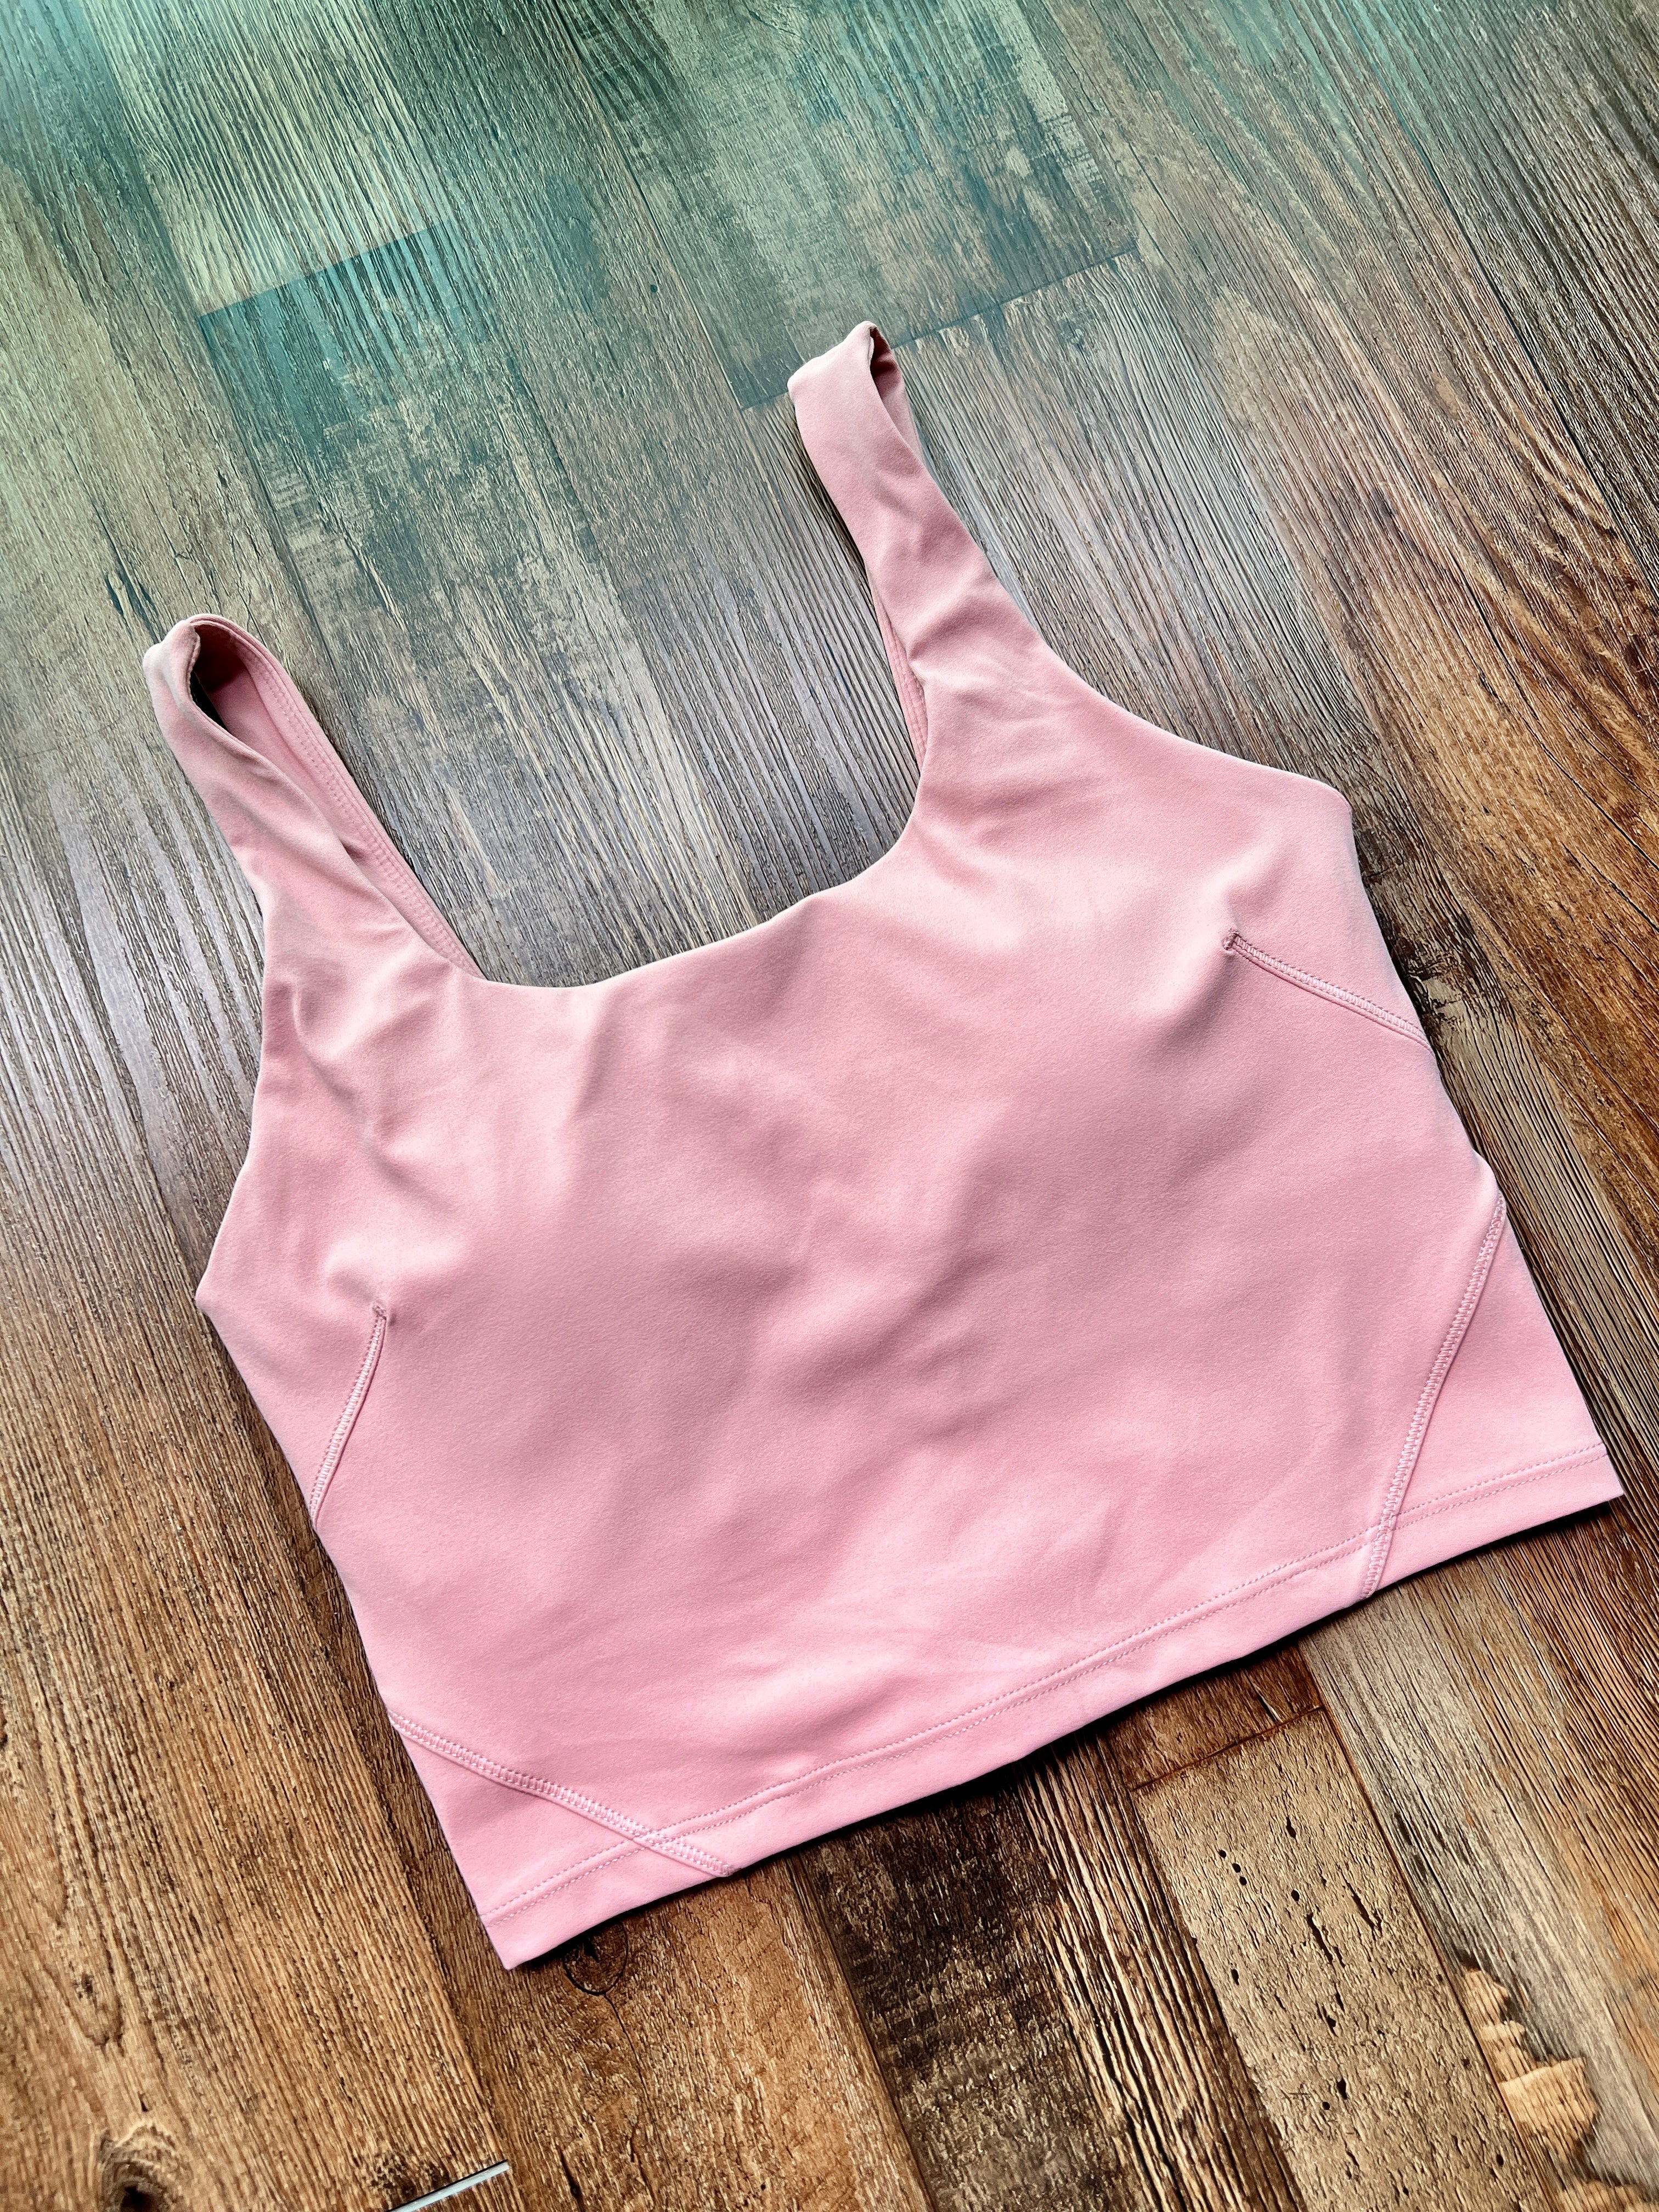 Top Lady Plain Back Hook Pink Sports Hosiery Bra, For Daily Wear at Rs  140/piece in Mumbai